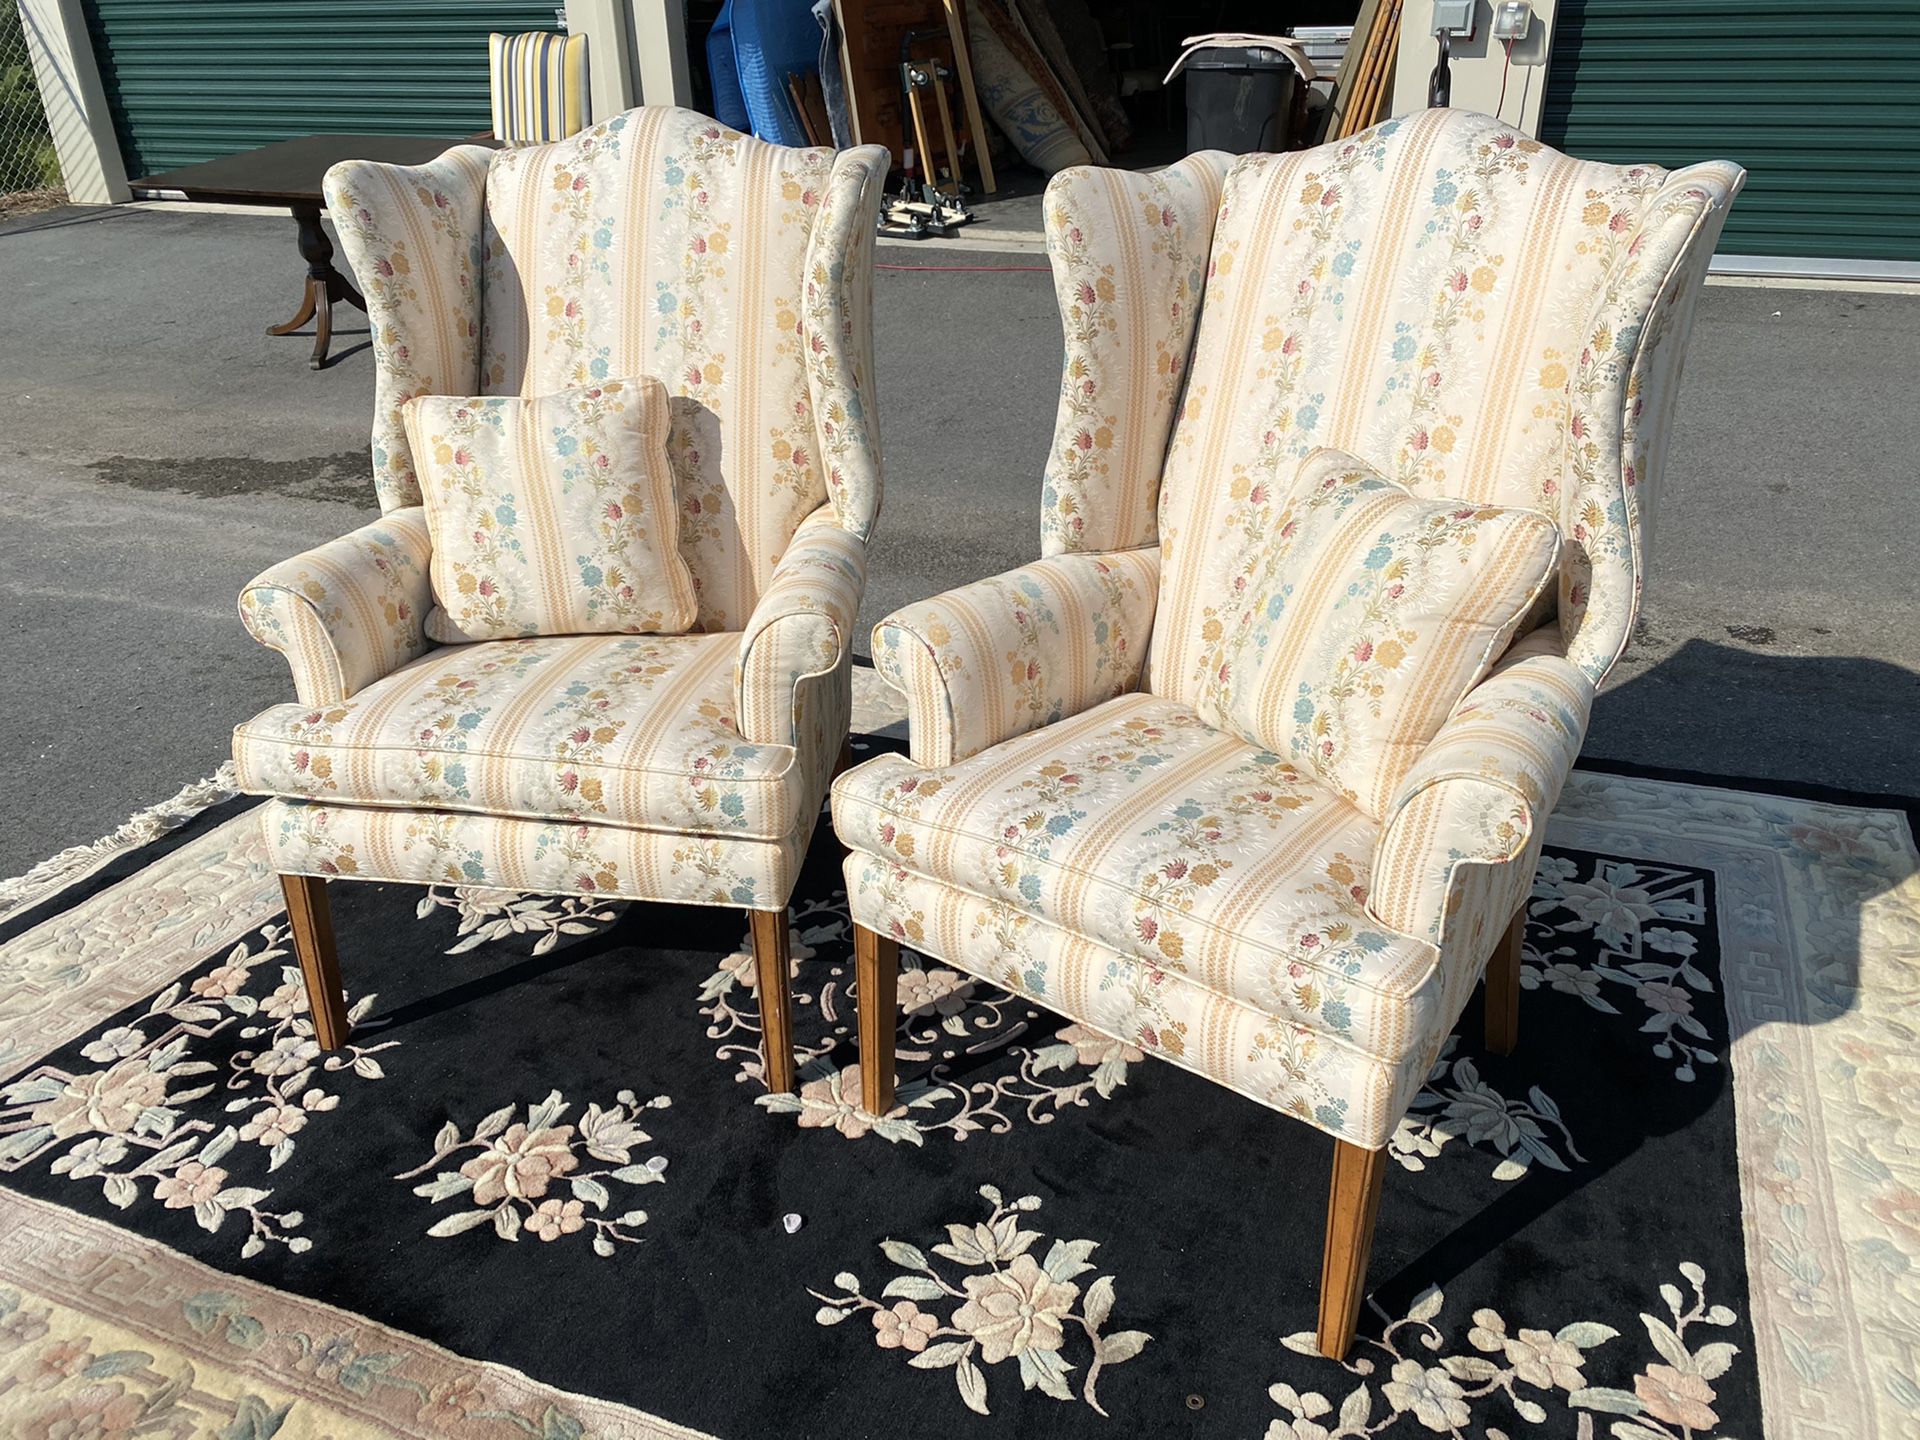 LIKE NEW - Ethan Allen Wingback Chairs